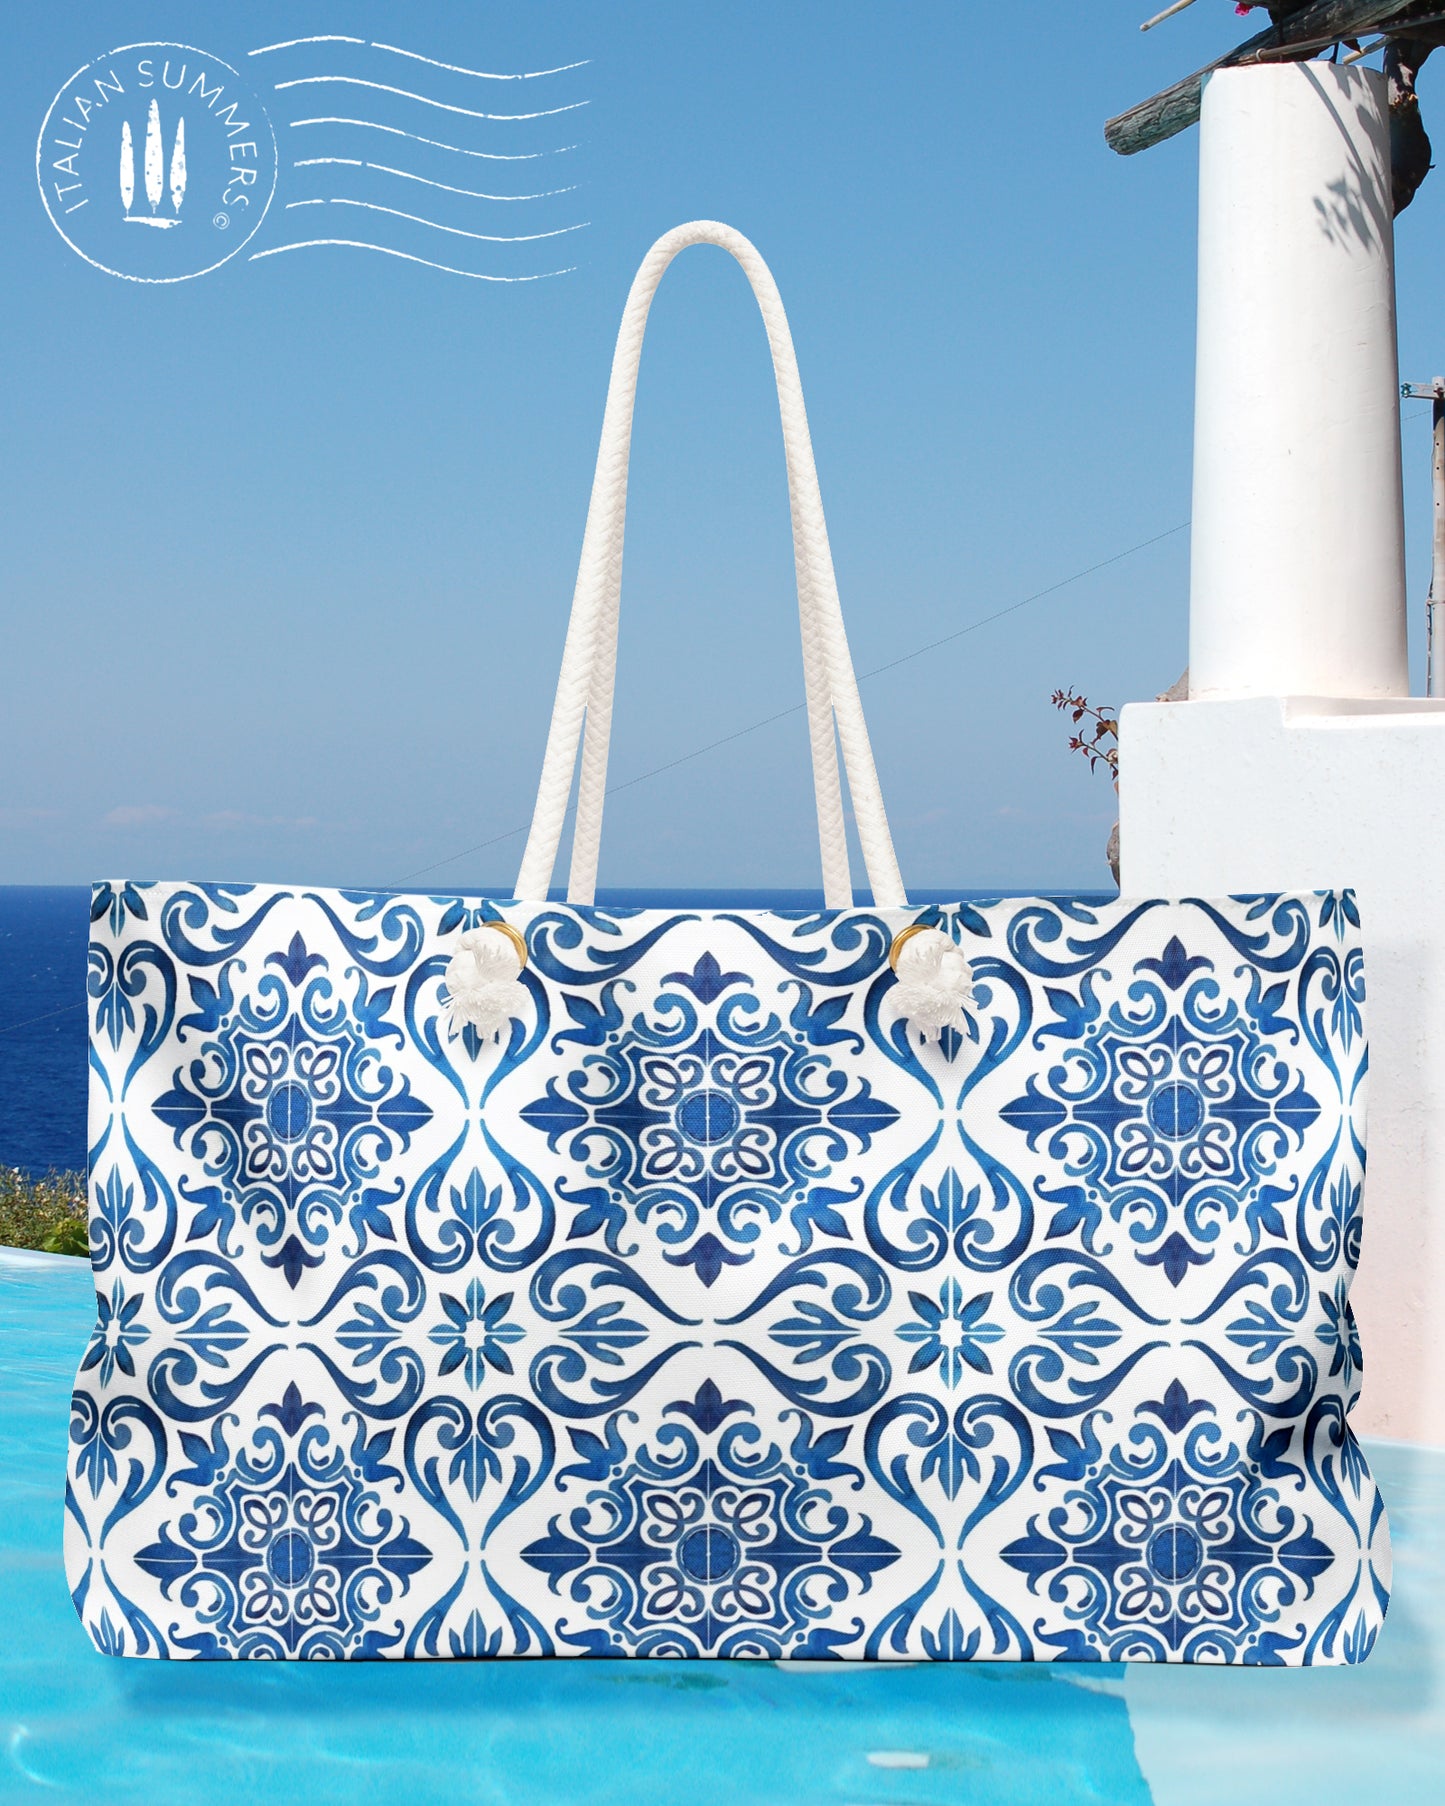 XL Italy -inspired  Beach Bag with printed Italian blue tile pattern and Sorrento Lemons with a quote between them: " I don't need therapy, I just need to go to Italy"  made to order  bag, by Italian Summers.